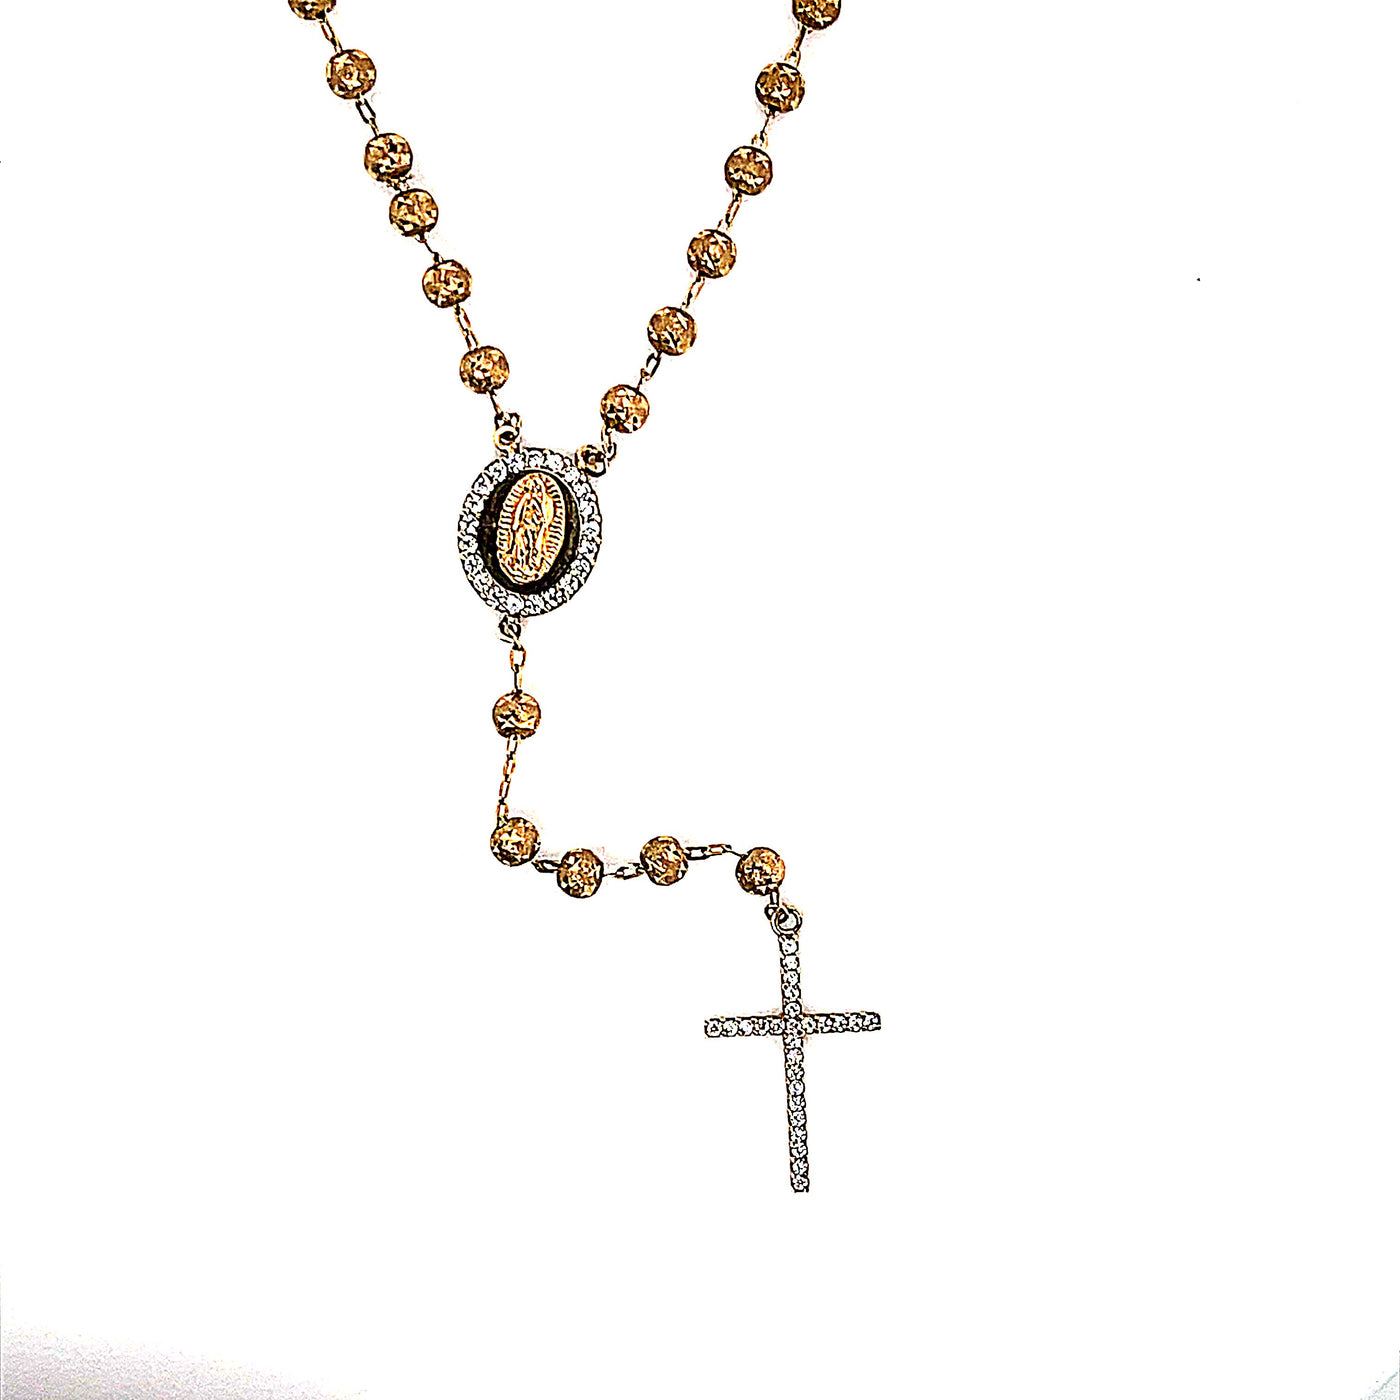 9K yellow gold sand blasted rosary necklace